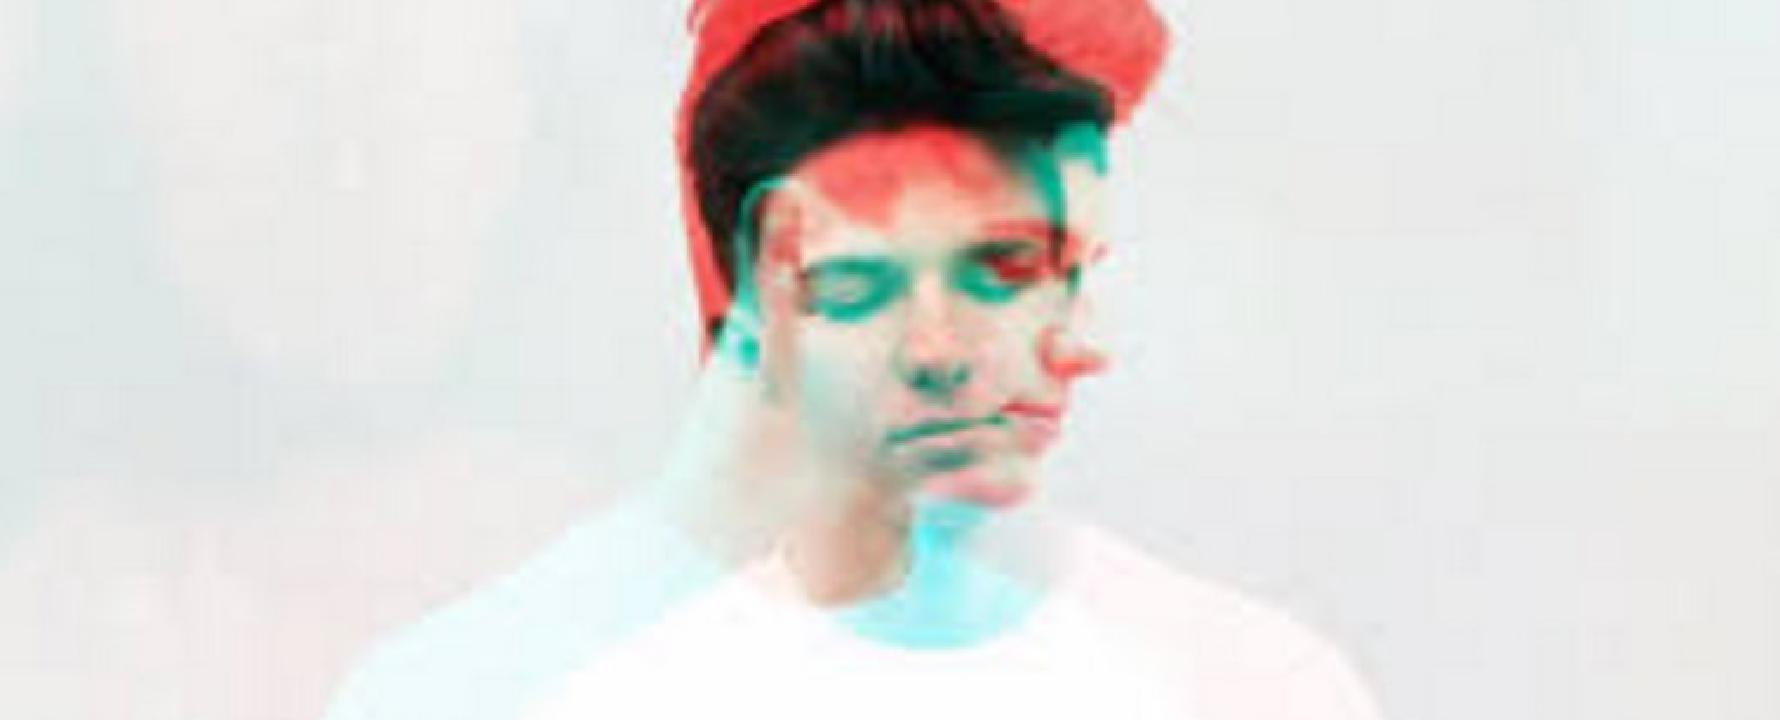 Promotional photograph of Petit Biscuit.